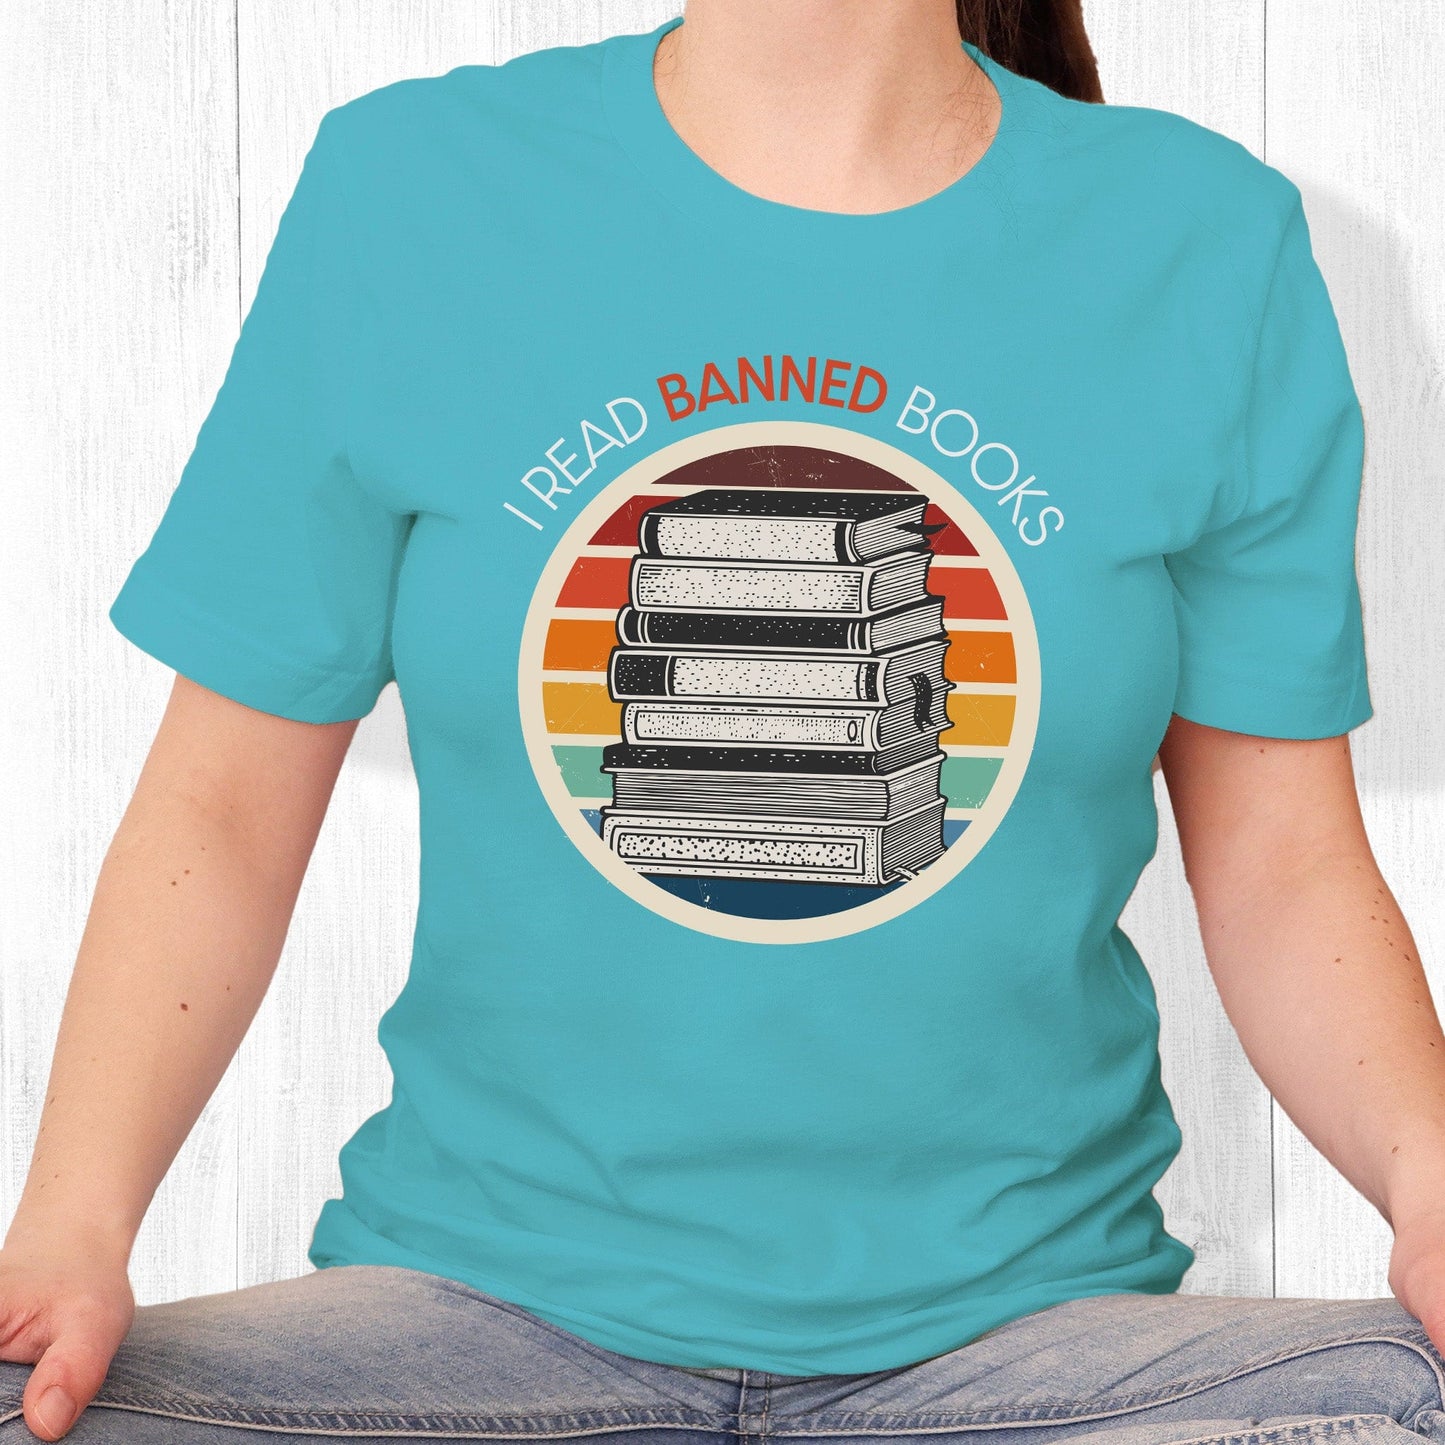 Turquoise unisex t-shirt with a circular graphic of stacked old books with a vintage sunset made from horizontal lines behind it. “I READ BANNED BOOKS” is arched over the graphic with the word. “BANNED” an orange color.